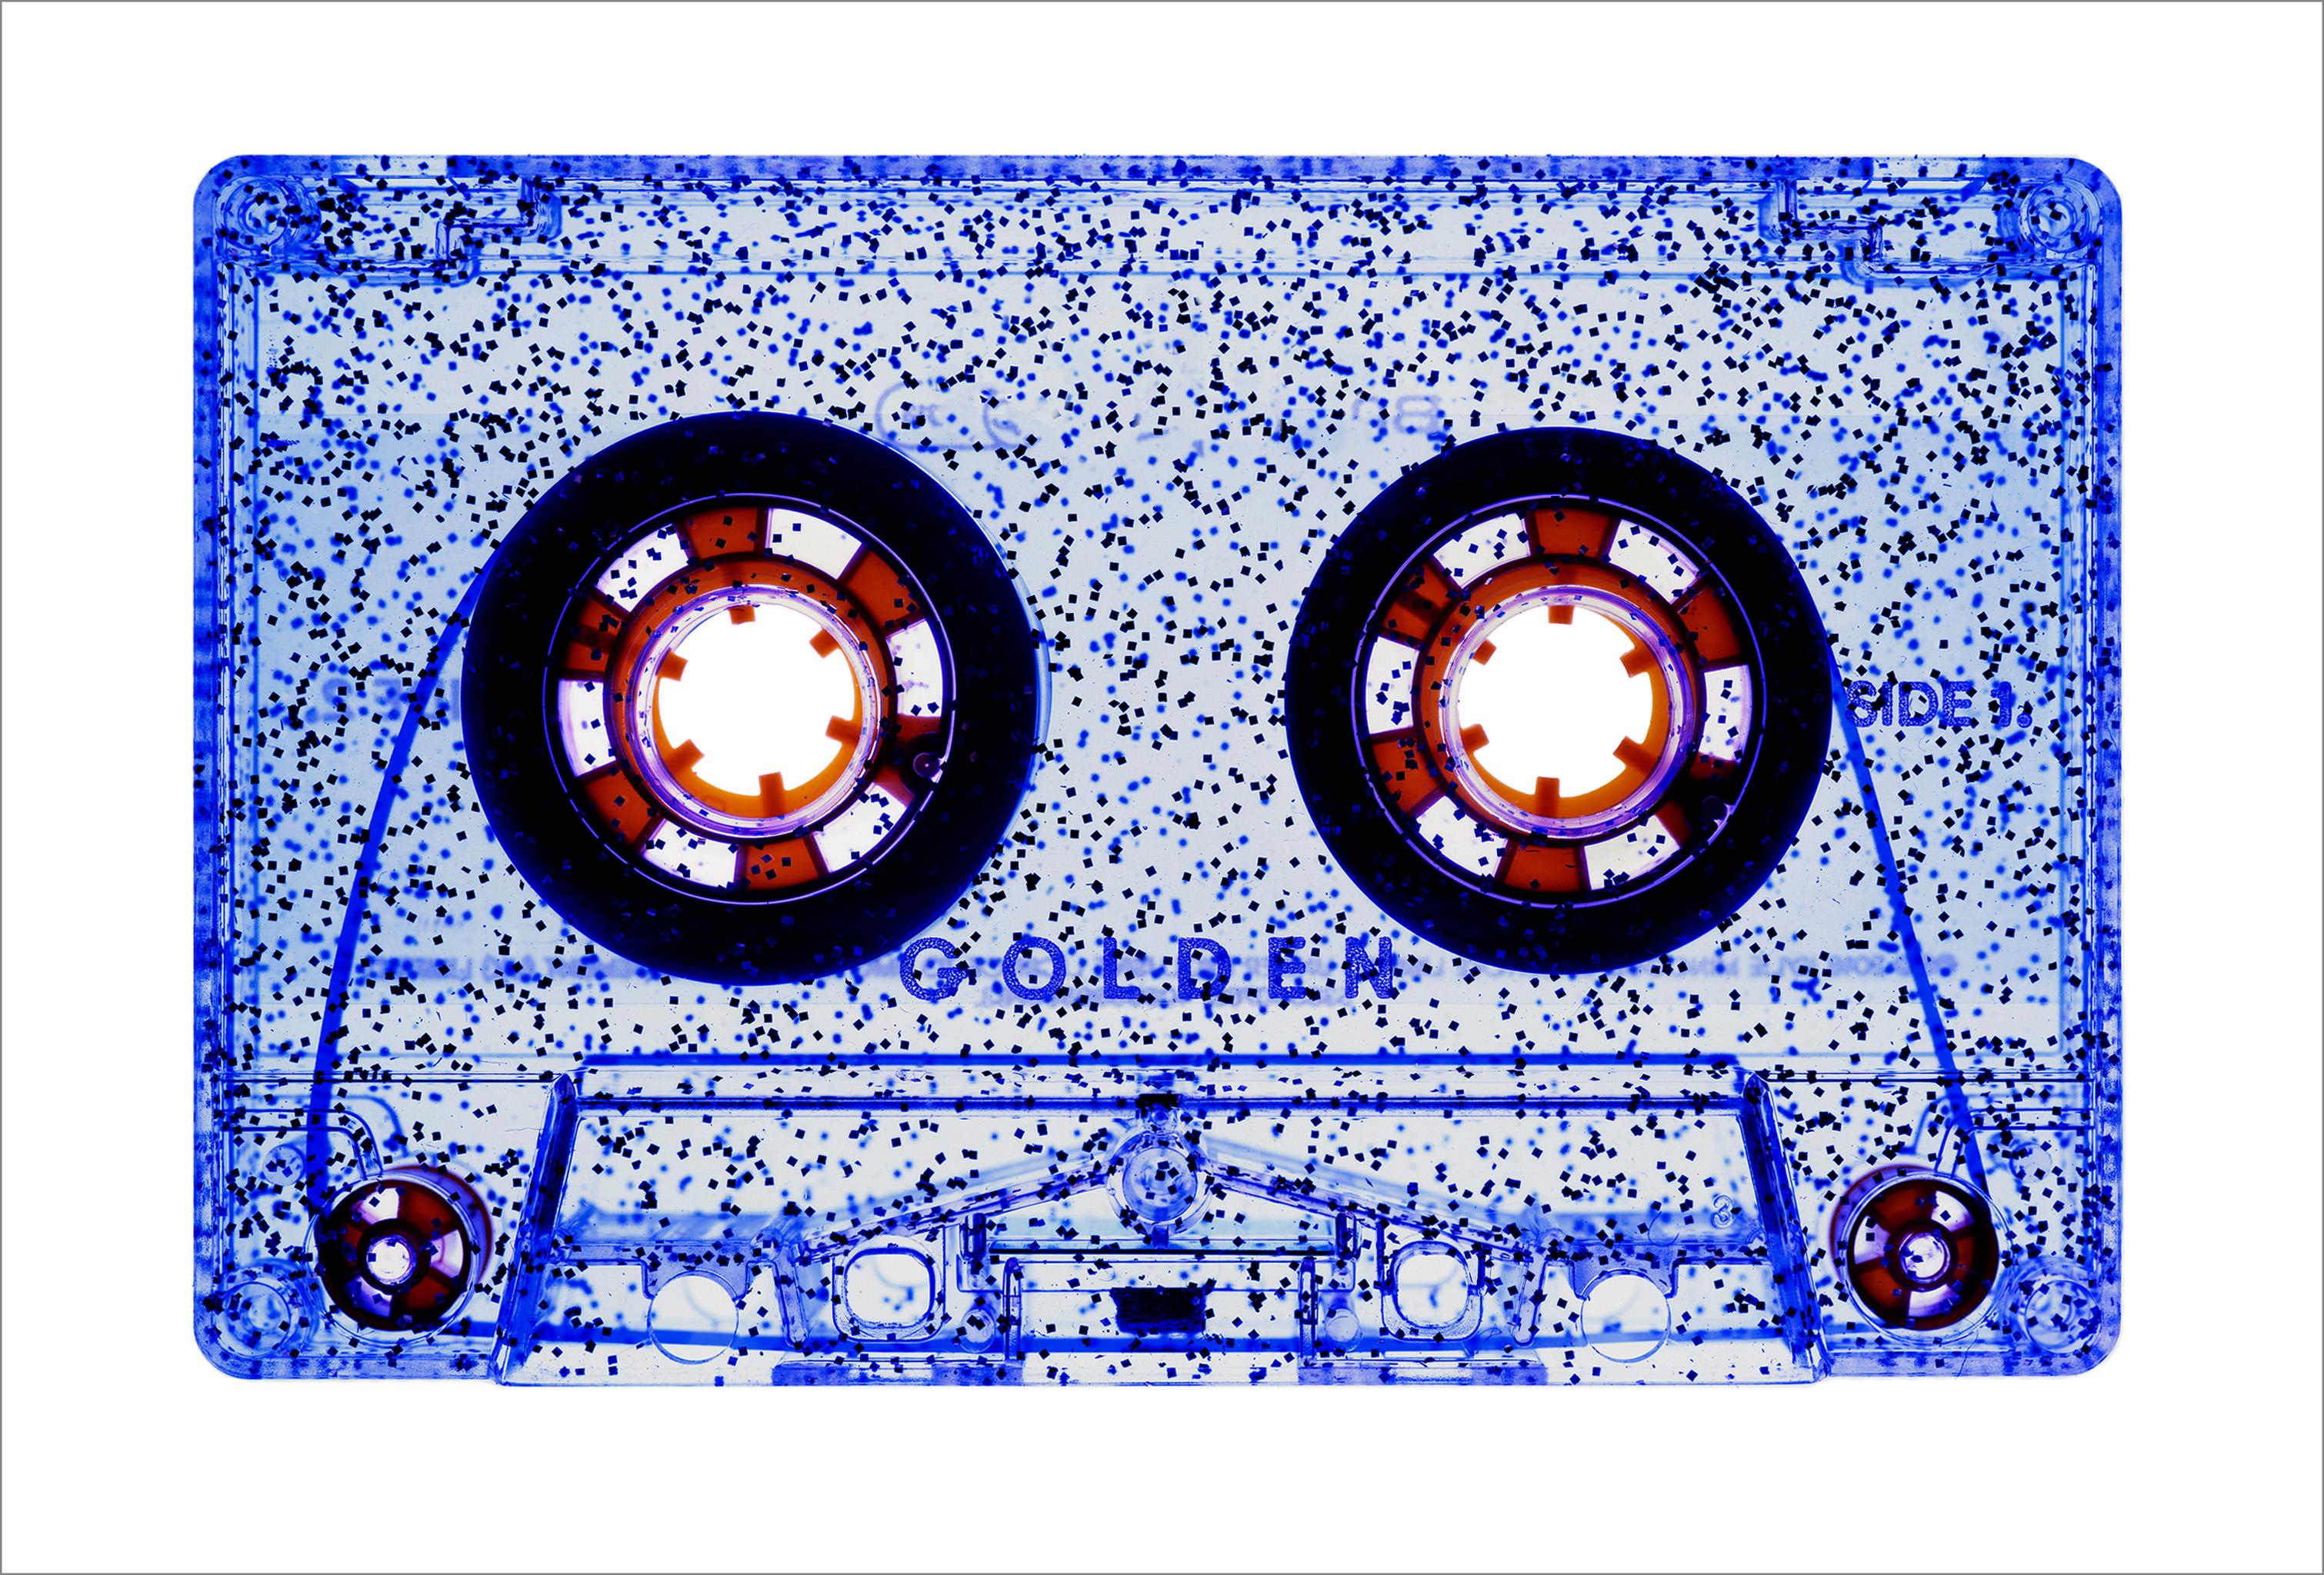 Heidler & Heeps Color Photograph - Tape Collection, All That Glitters is Not Golden (Blue) - Pop Art Photography